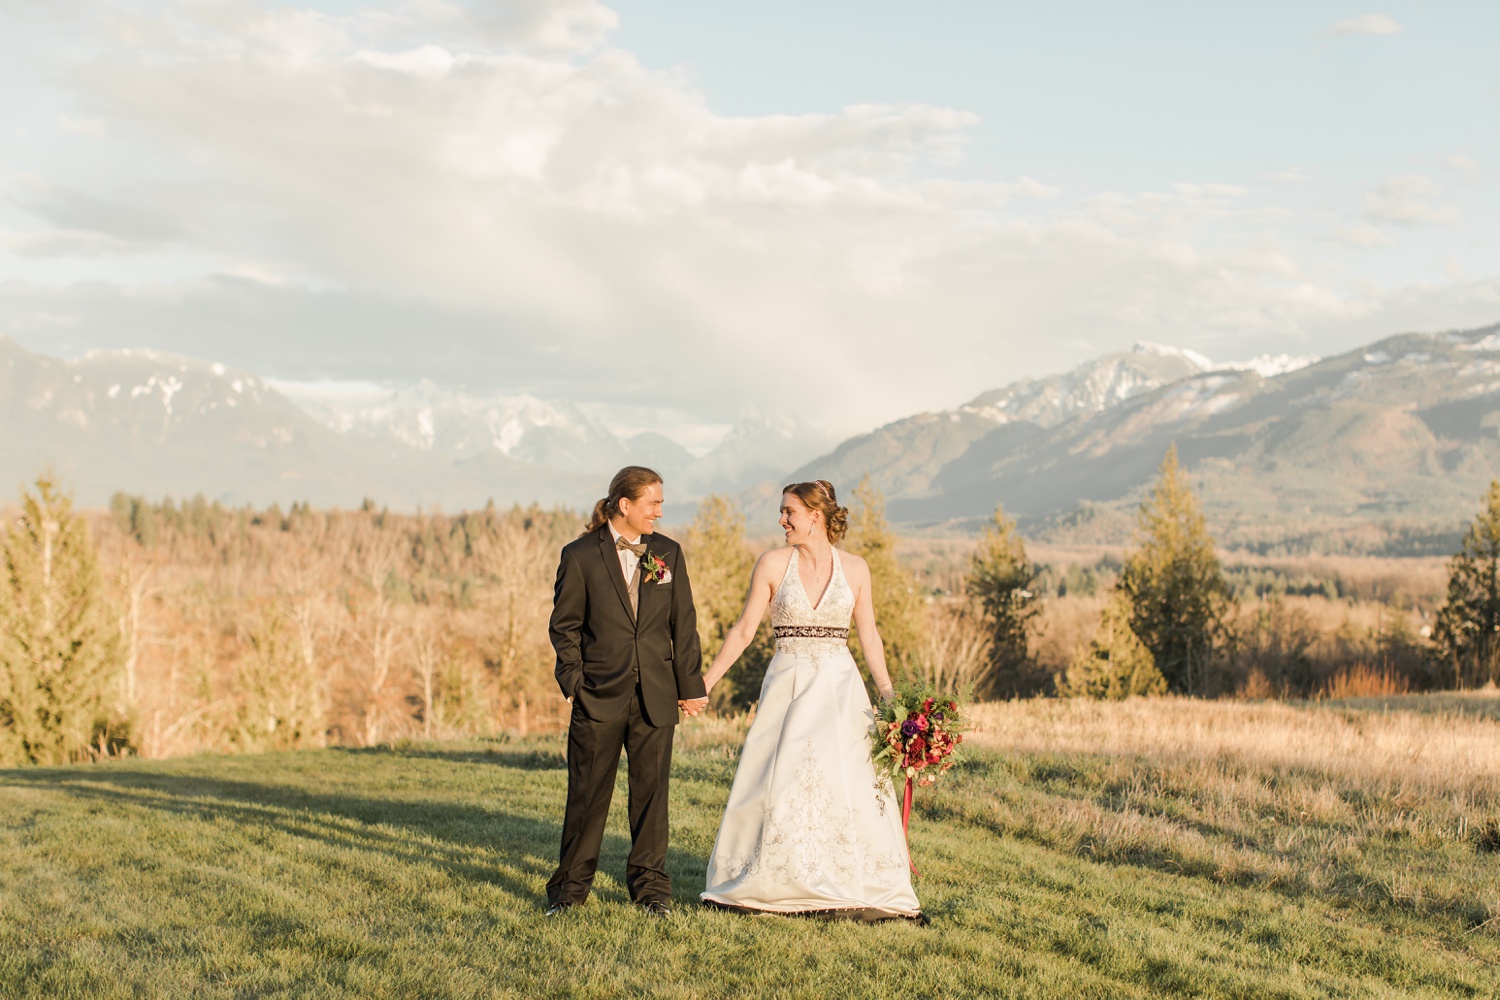 bride & groom at wedding in foothills of mountains near snohomish, wa.